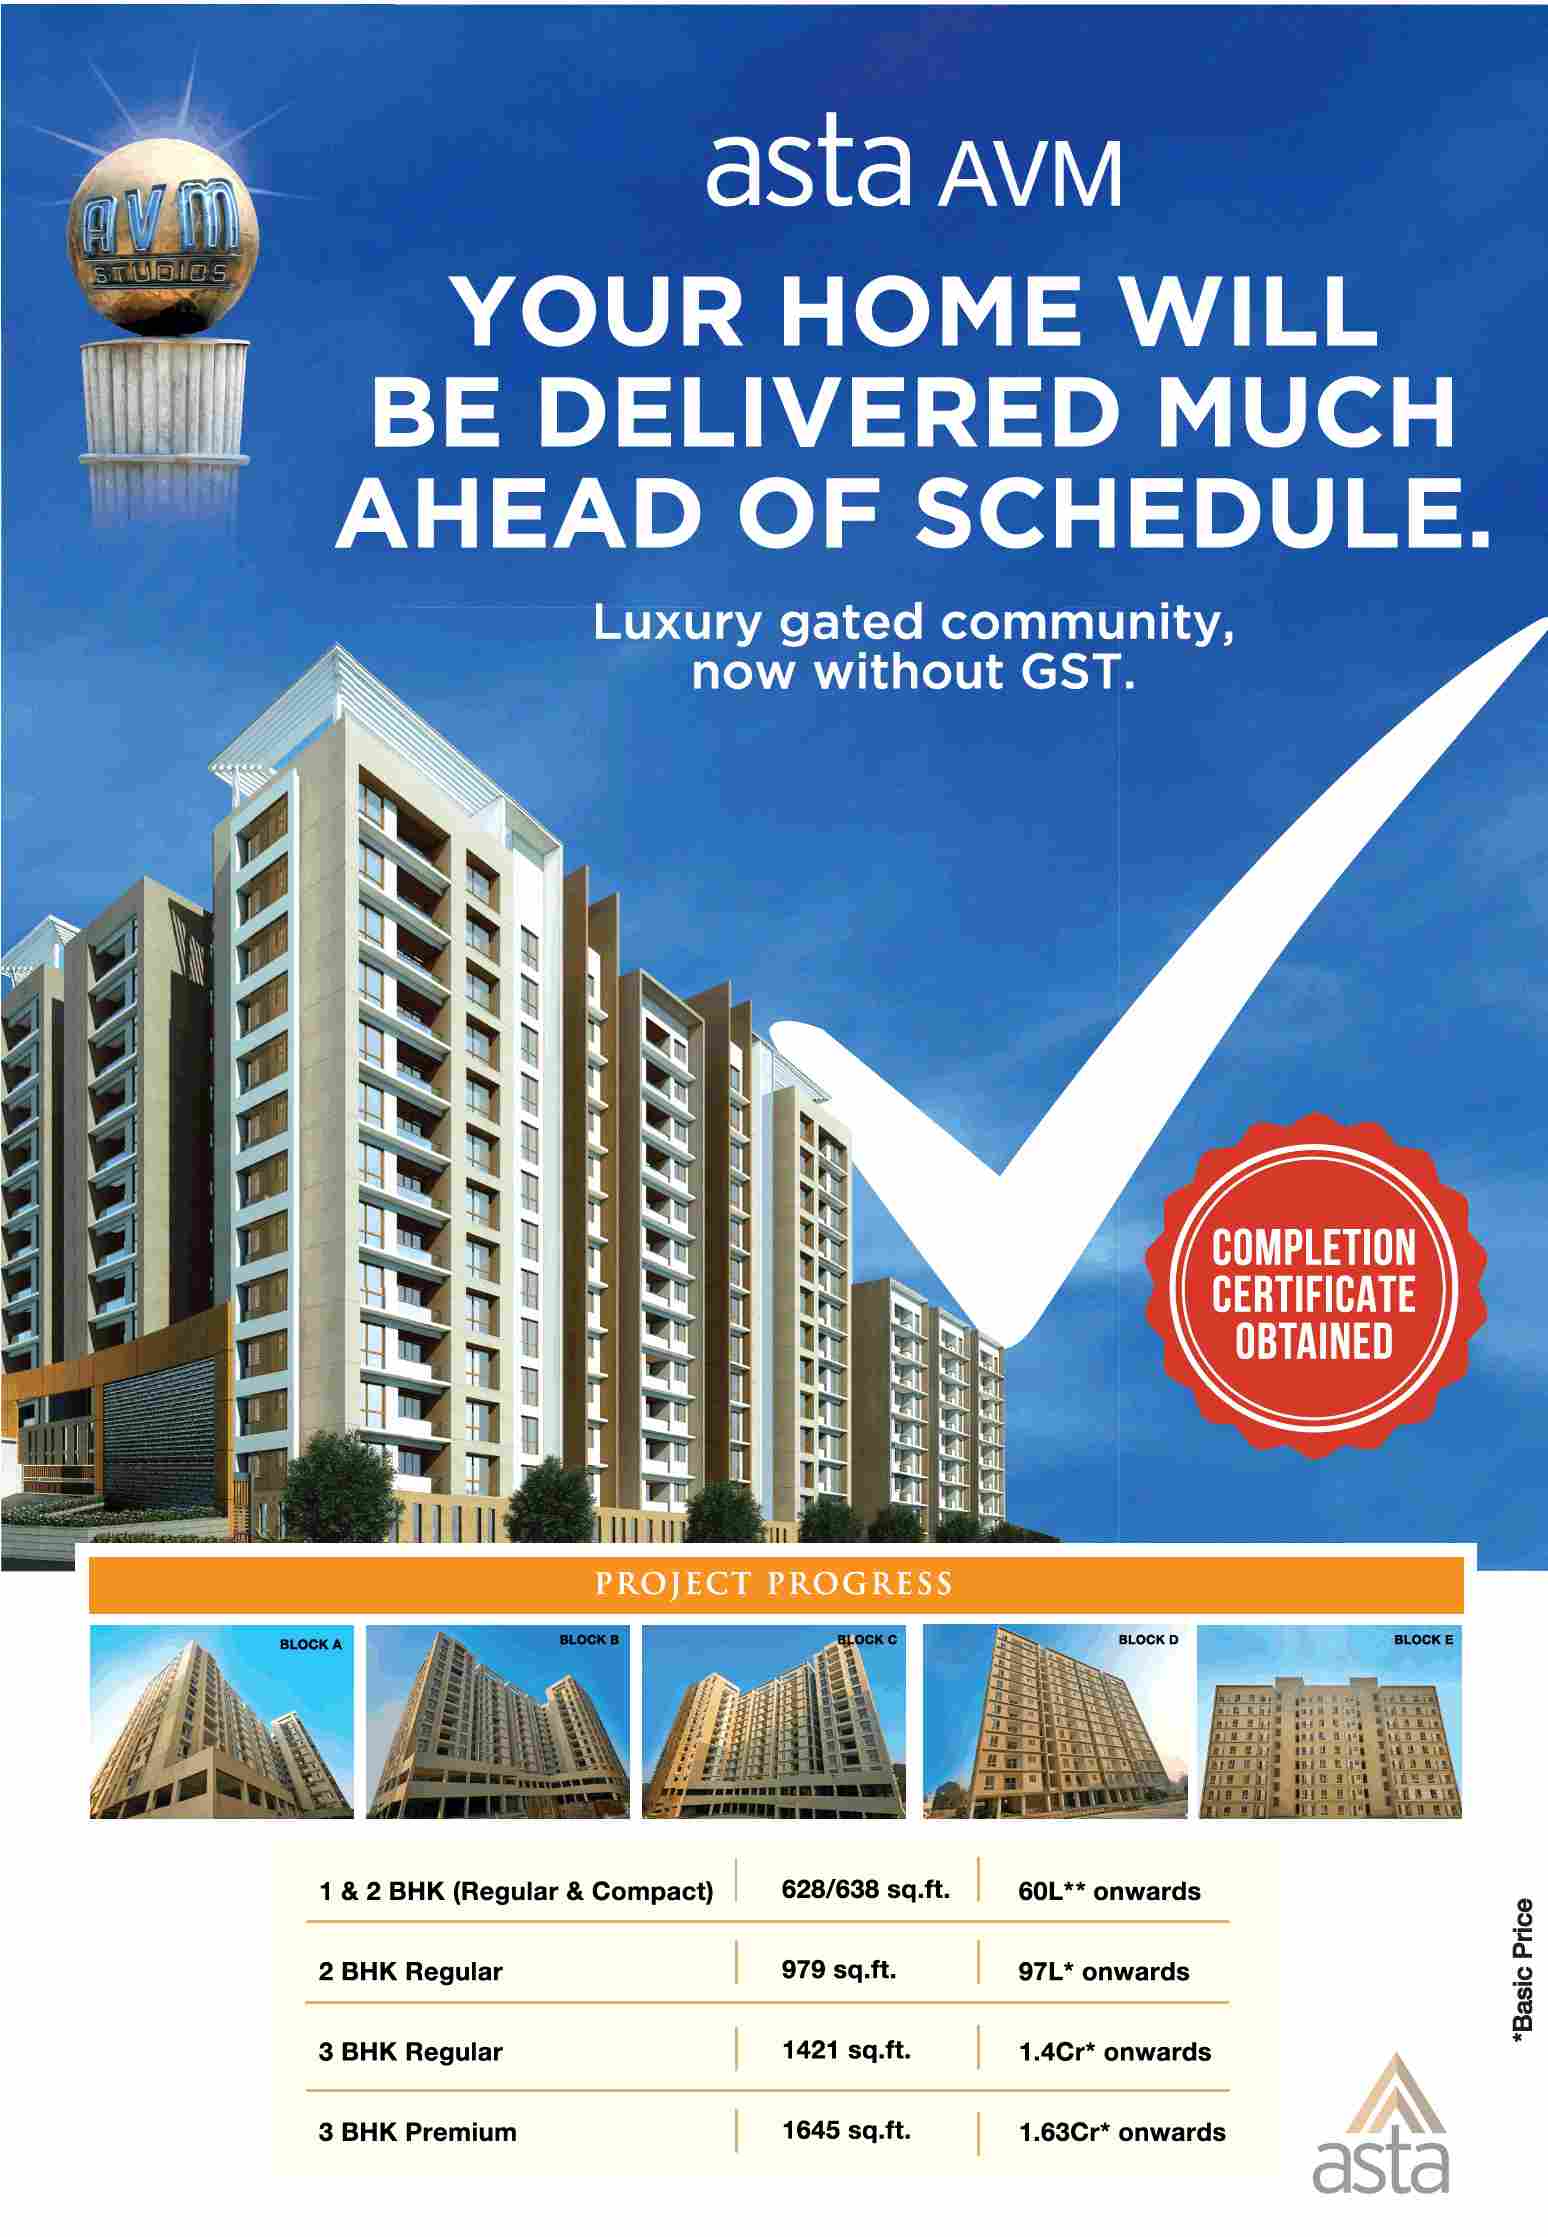 Reside in luxury gated community without GST at Asta Avm in Chennai